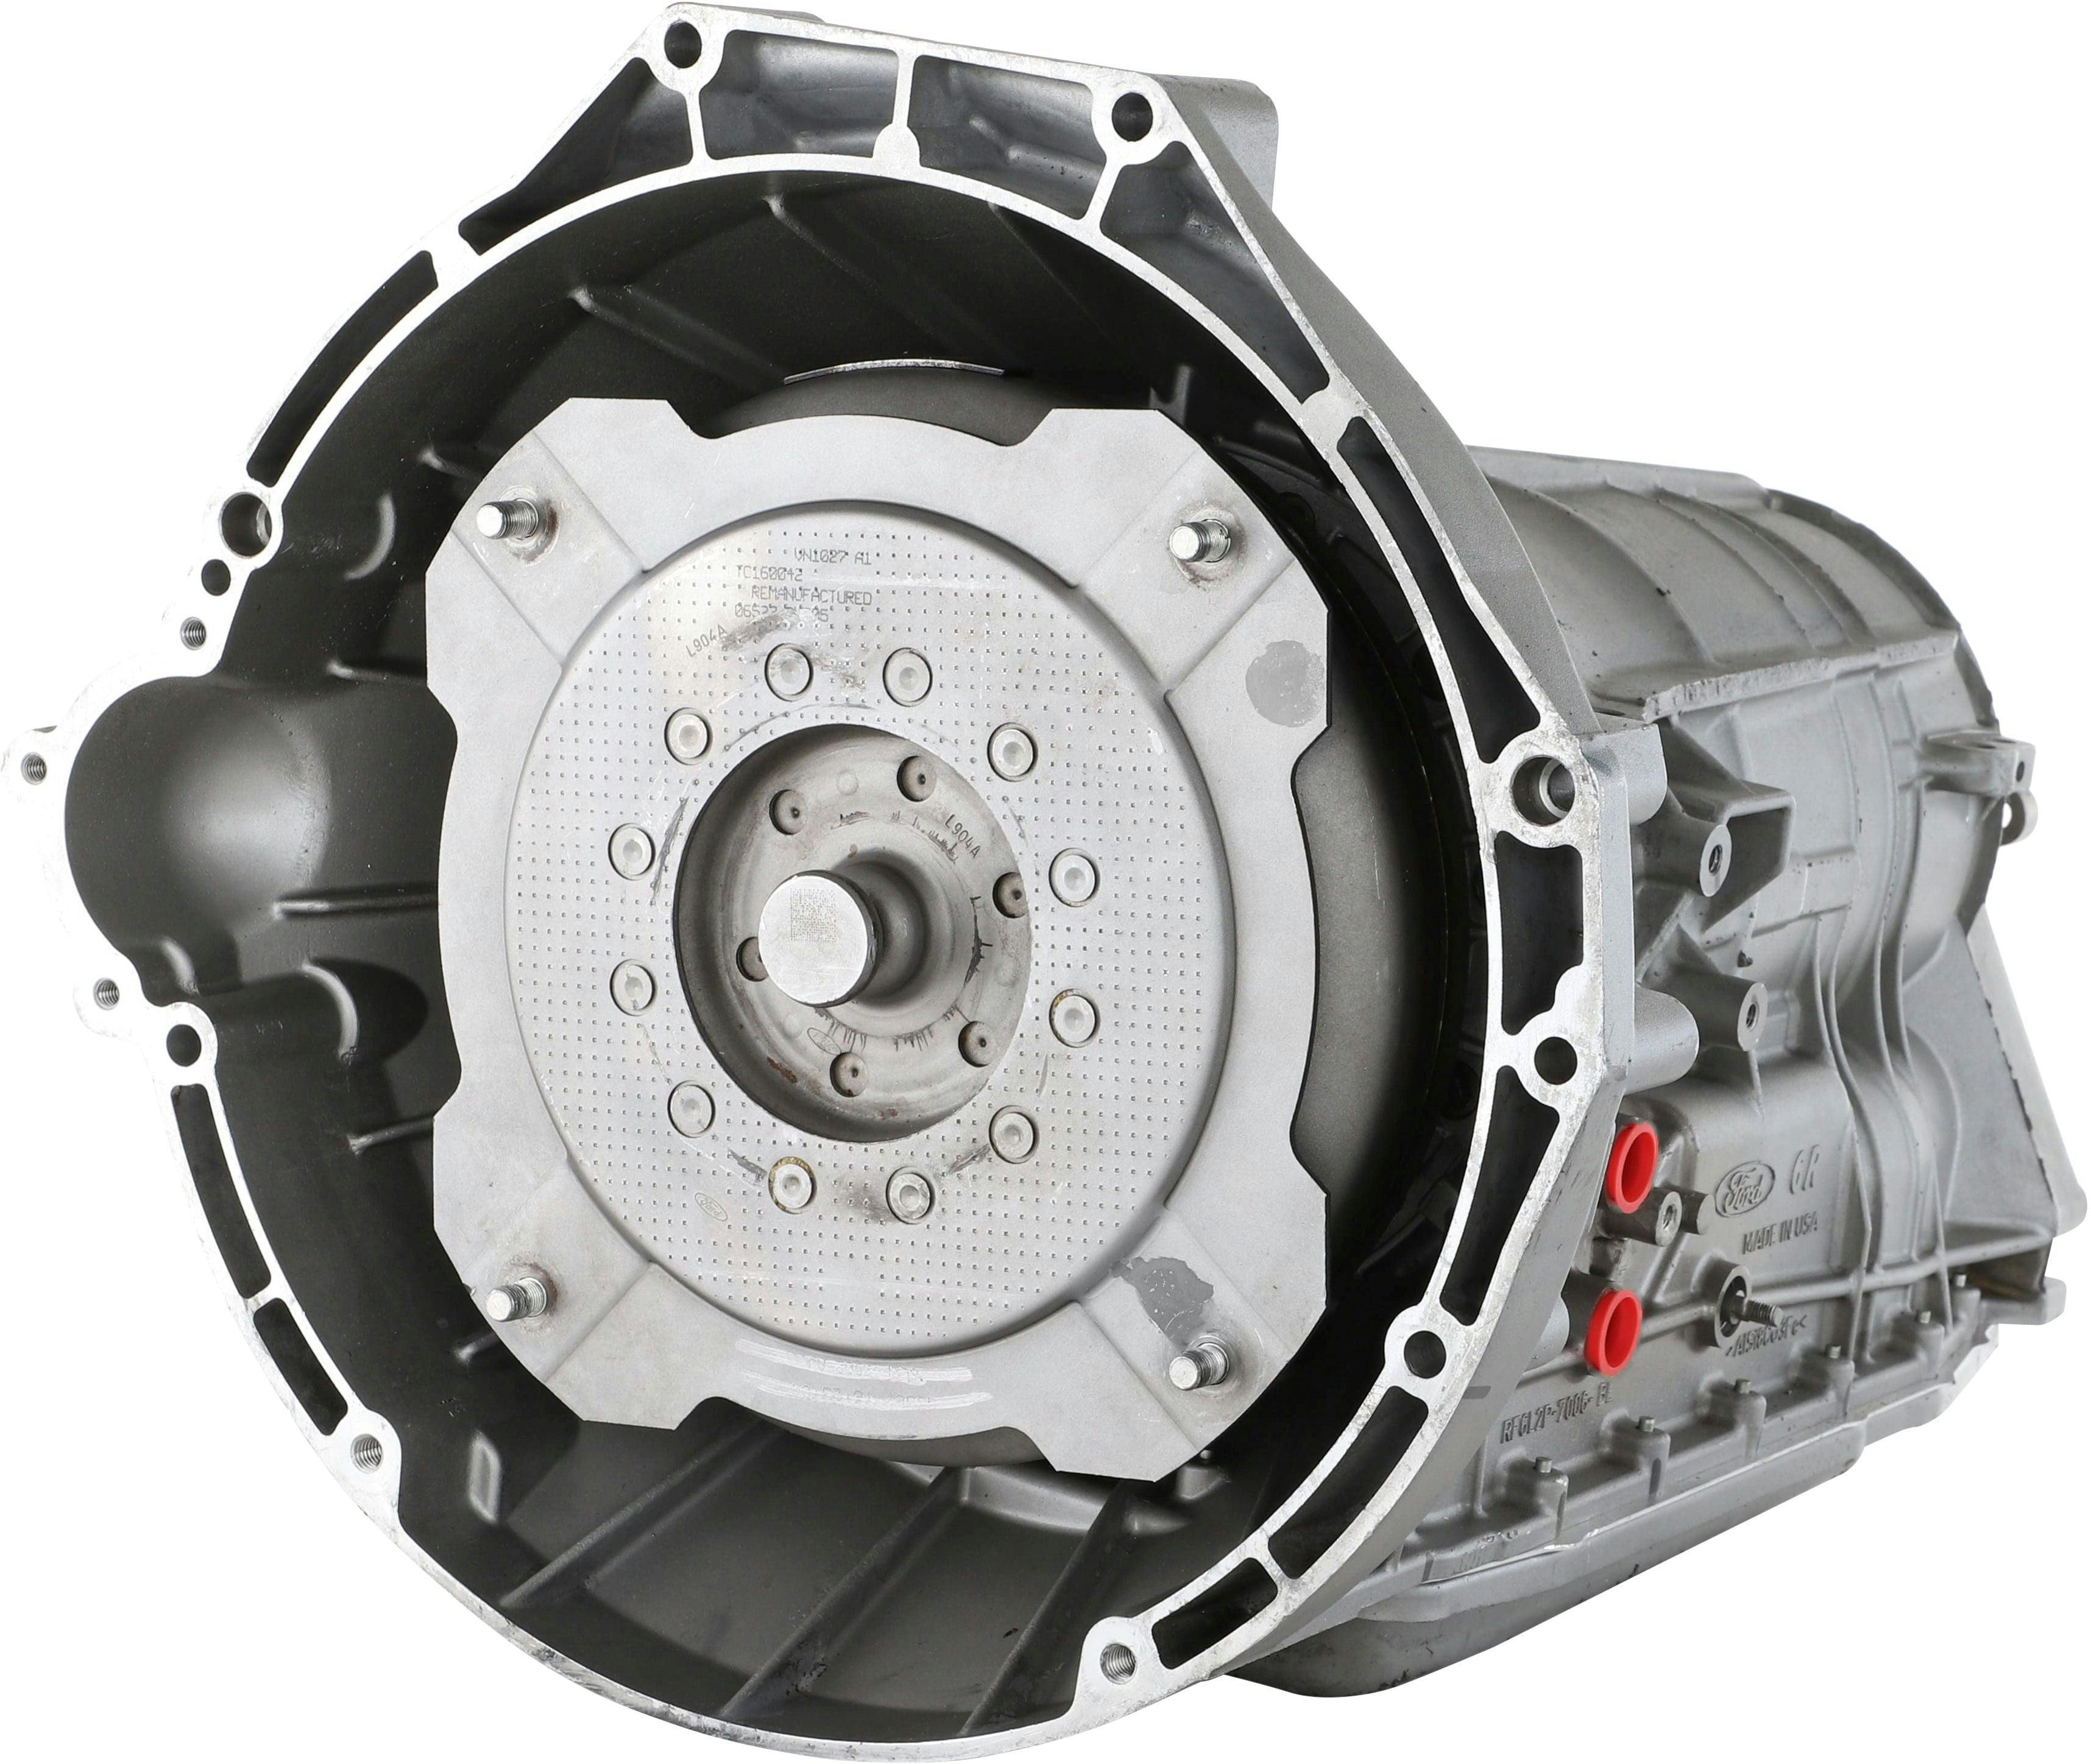 Automatic Transmission for 2007-2008 Ford Explorer/Explorer Sport Trac and Mercury Mountaineer RWD with 4.6L V8 Engine